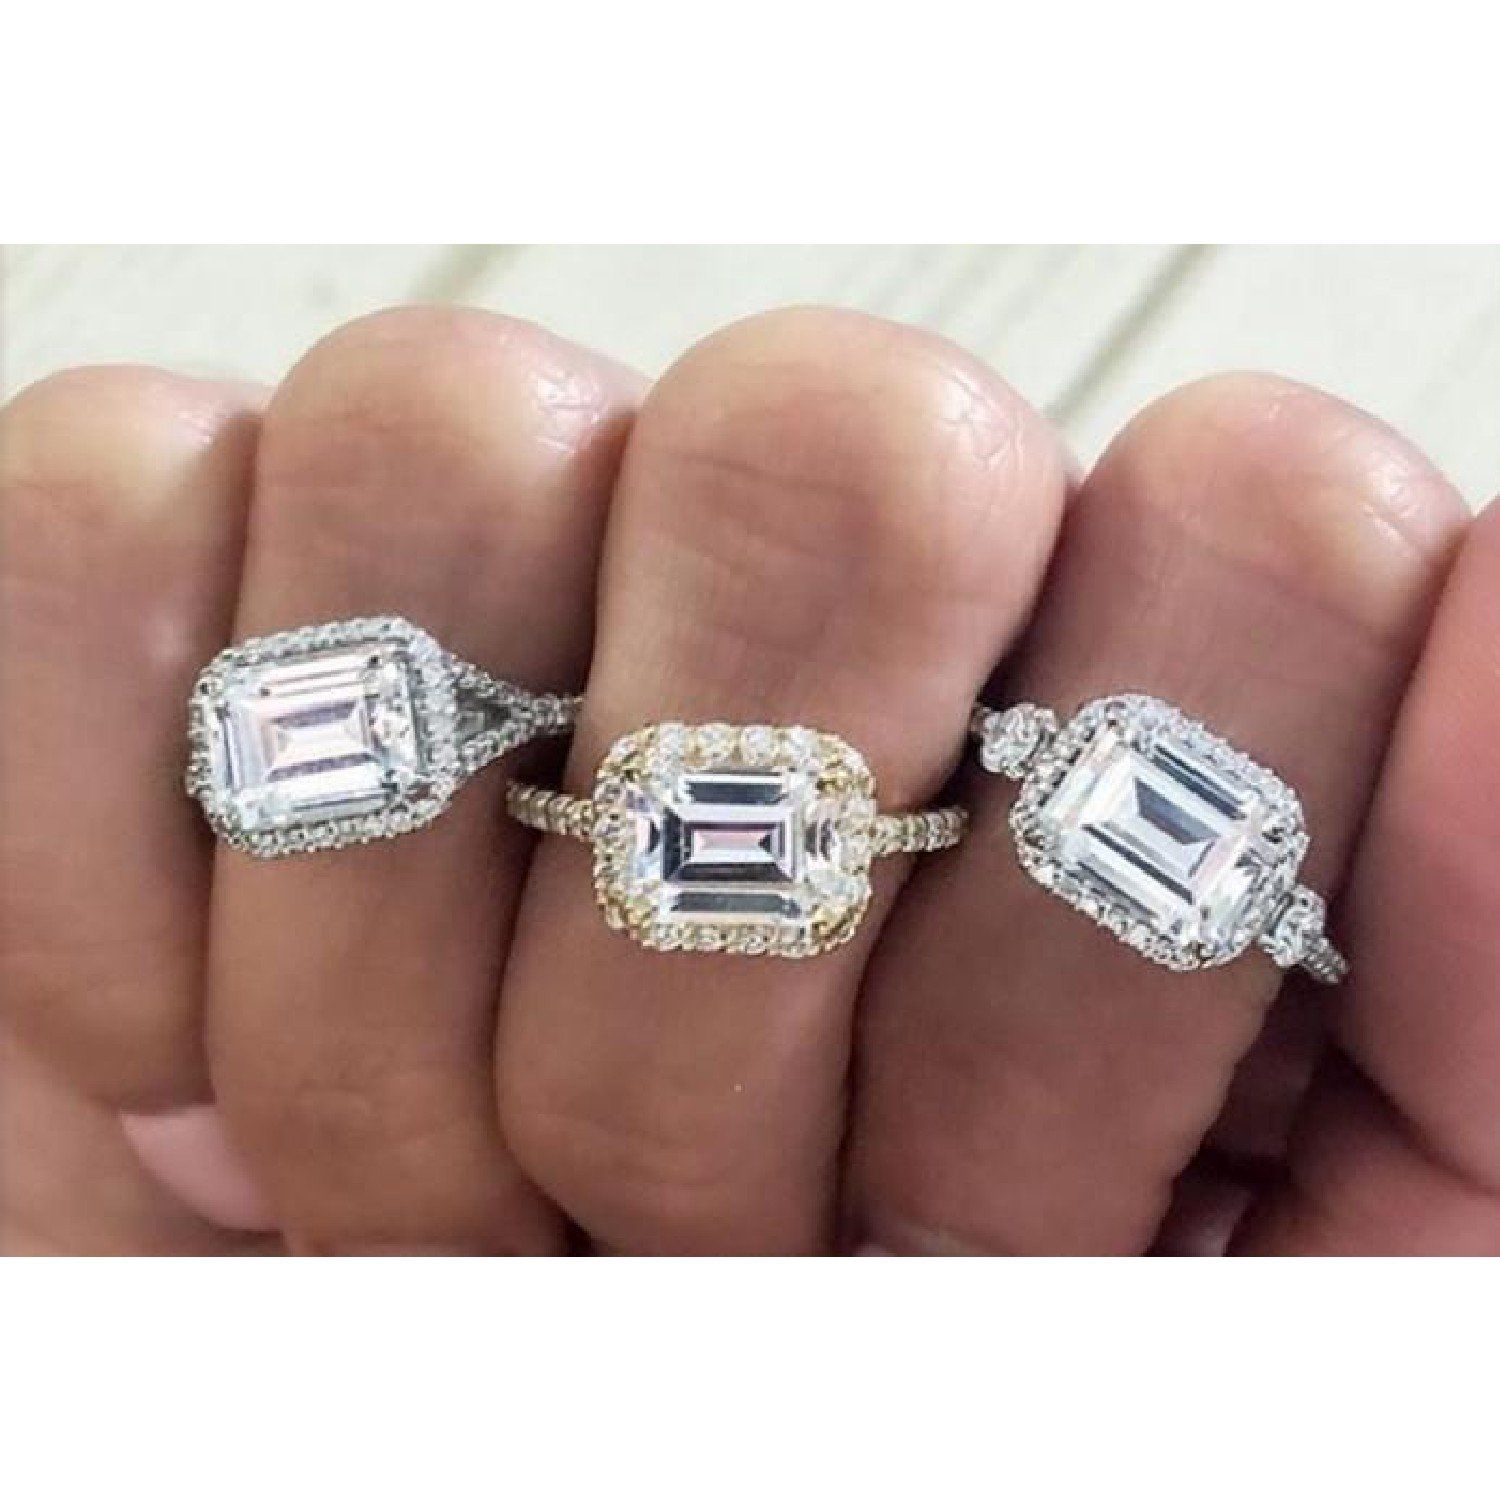 east-west set emerald cut engagement rings on hand